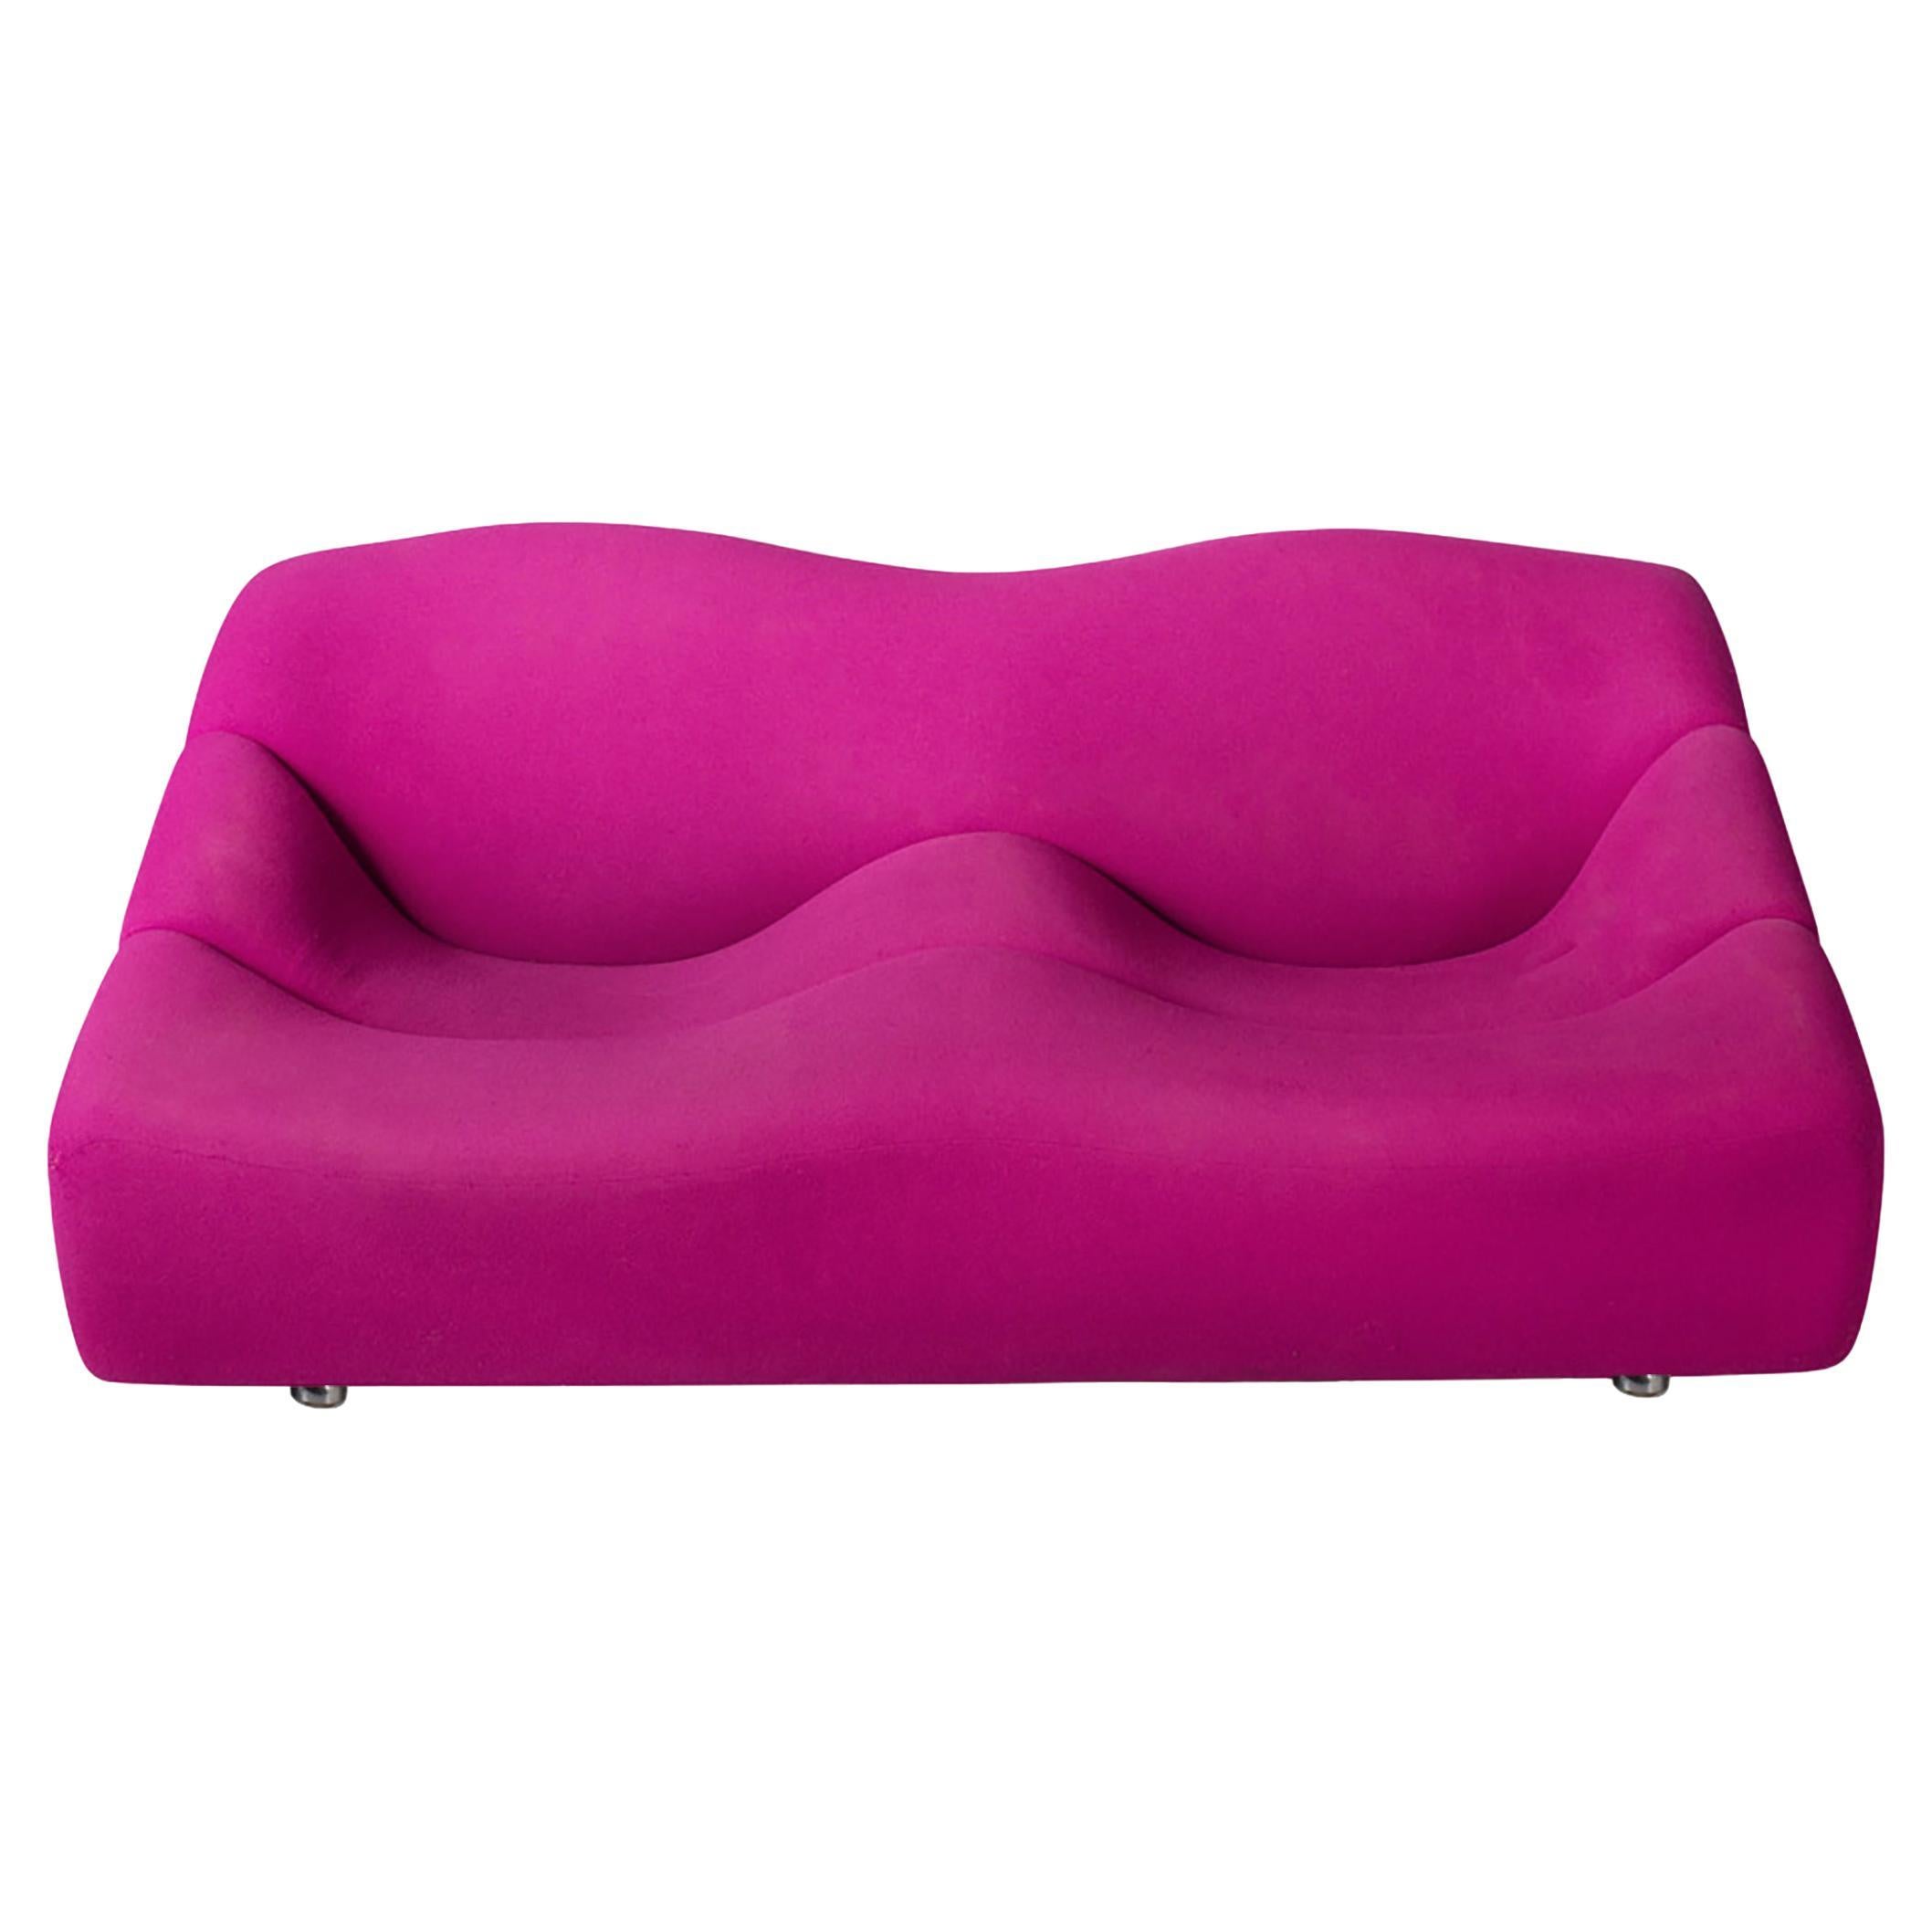 Pierre Paulin for Artifort´ABCD´ Settee in Fuchsia Upholstery